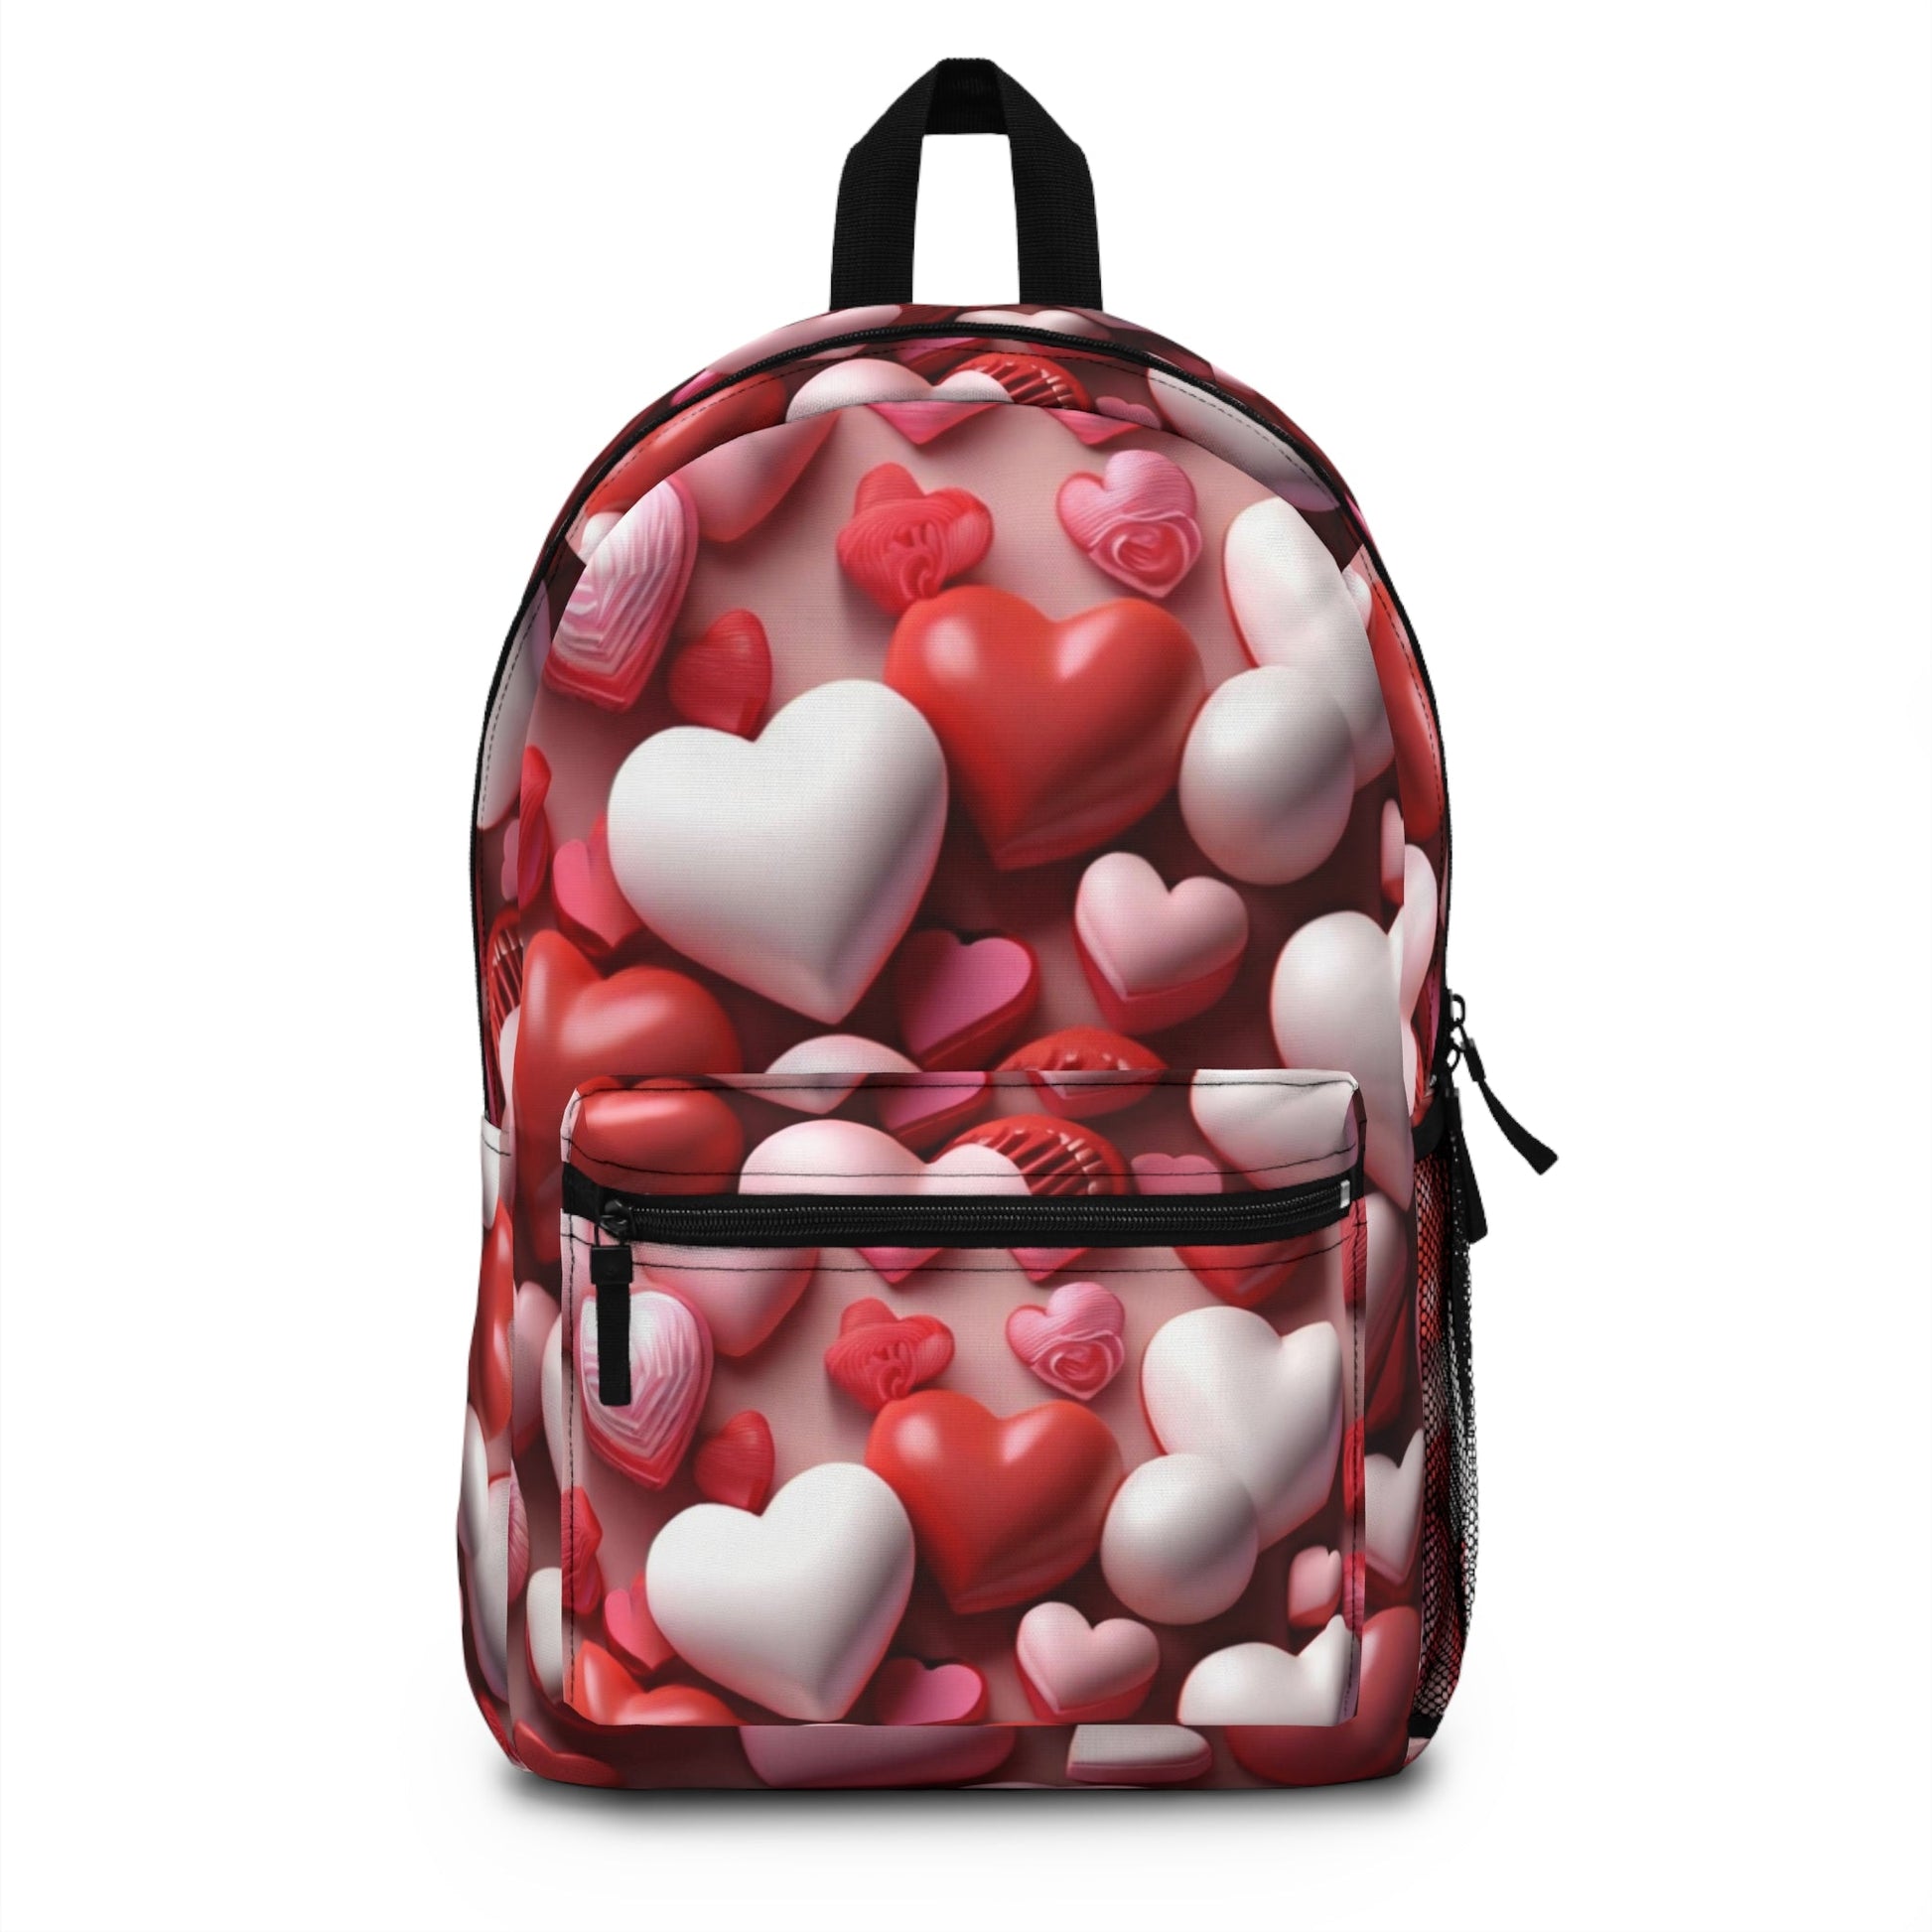 Bags - Happy Valentine's Day Backpack